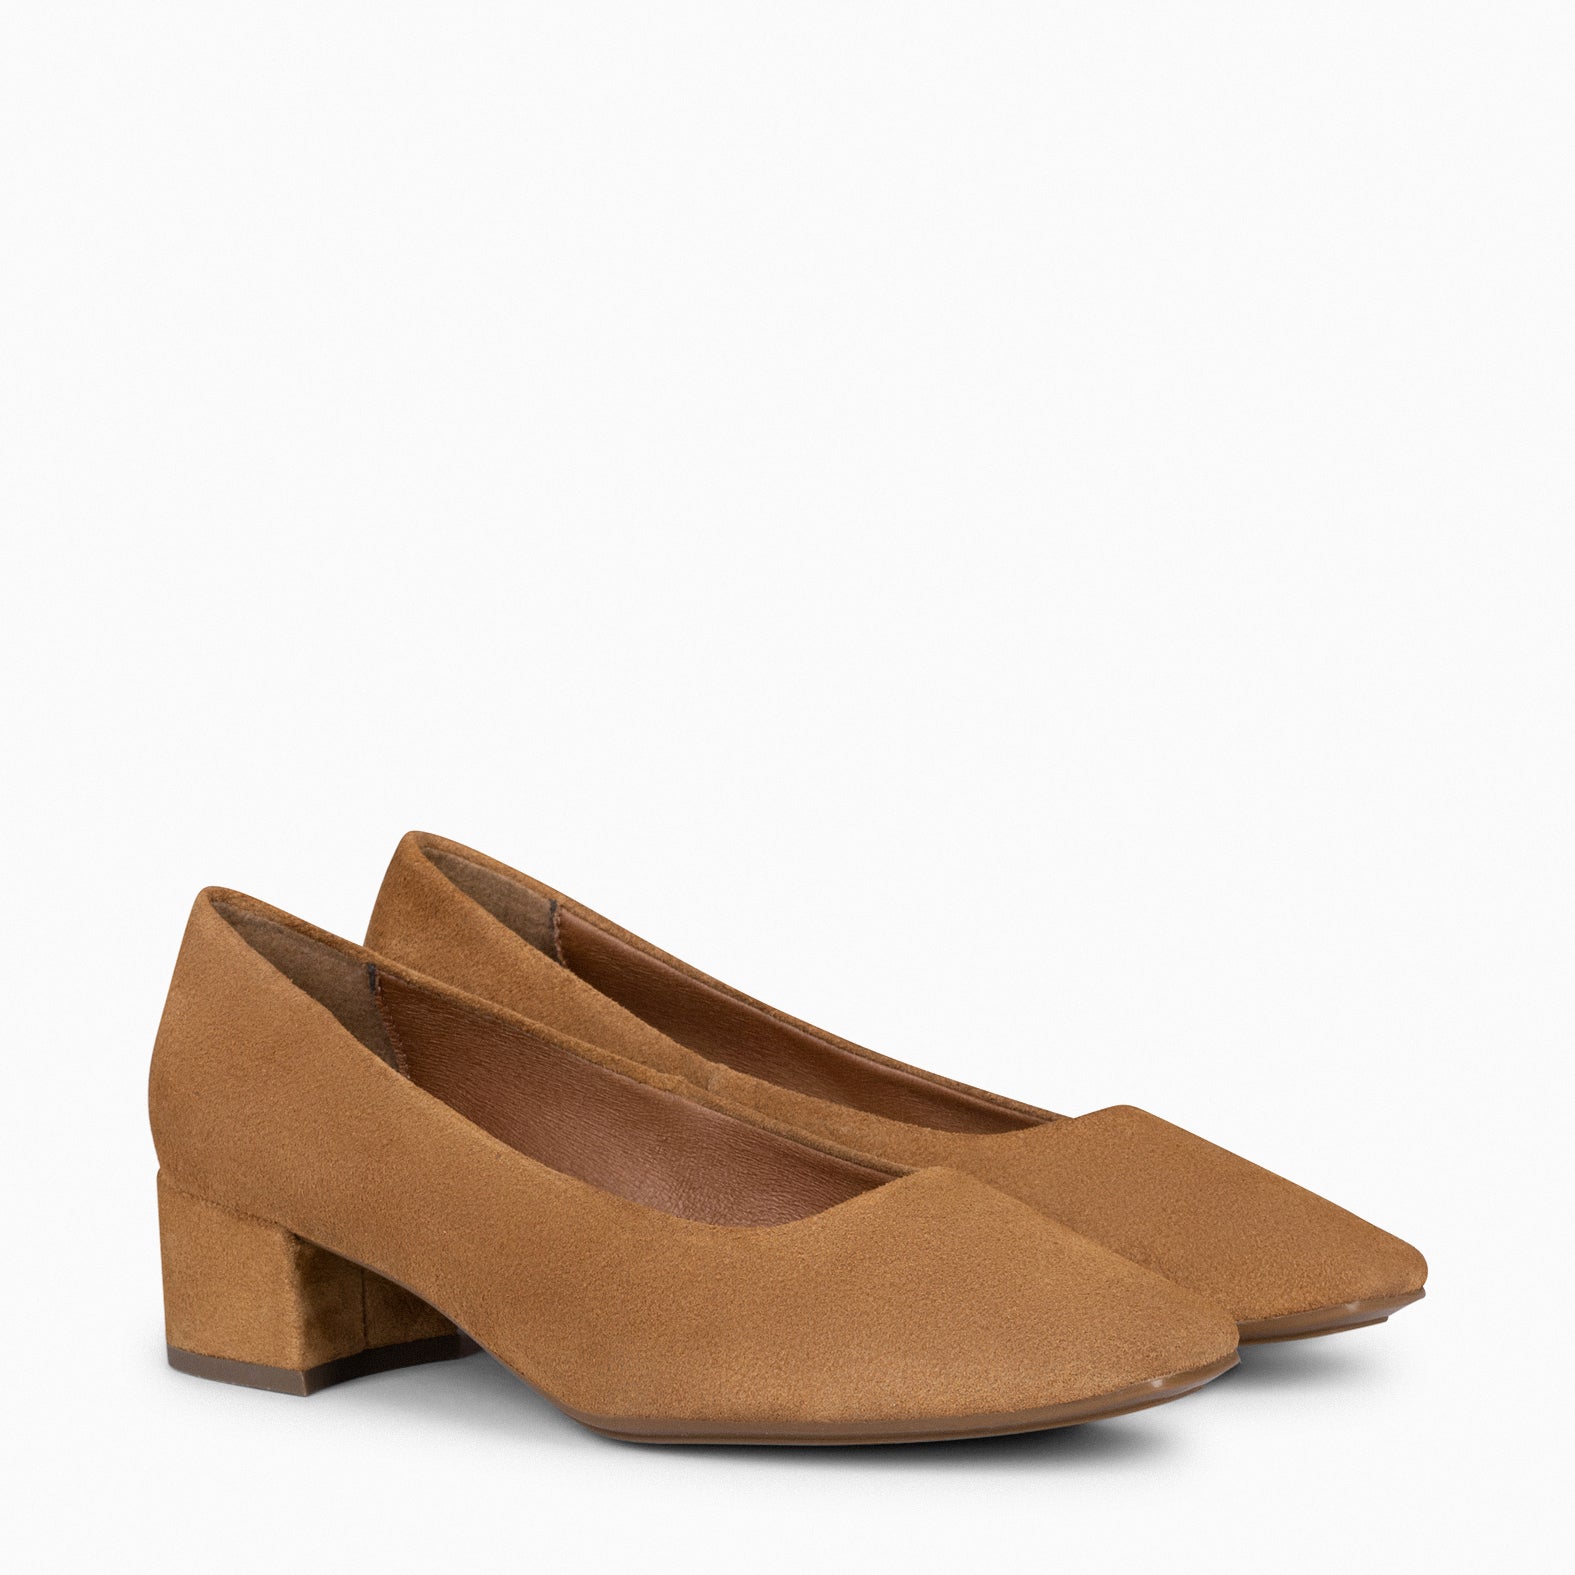 URBAN LADY – TAN suede leather low heels 